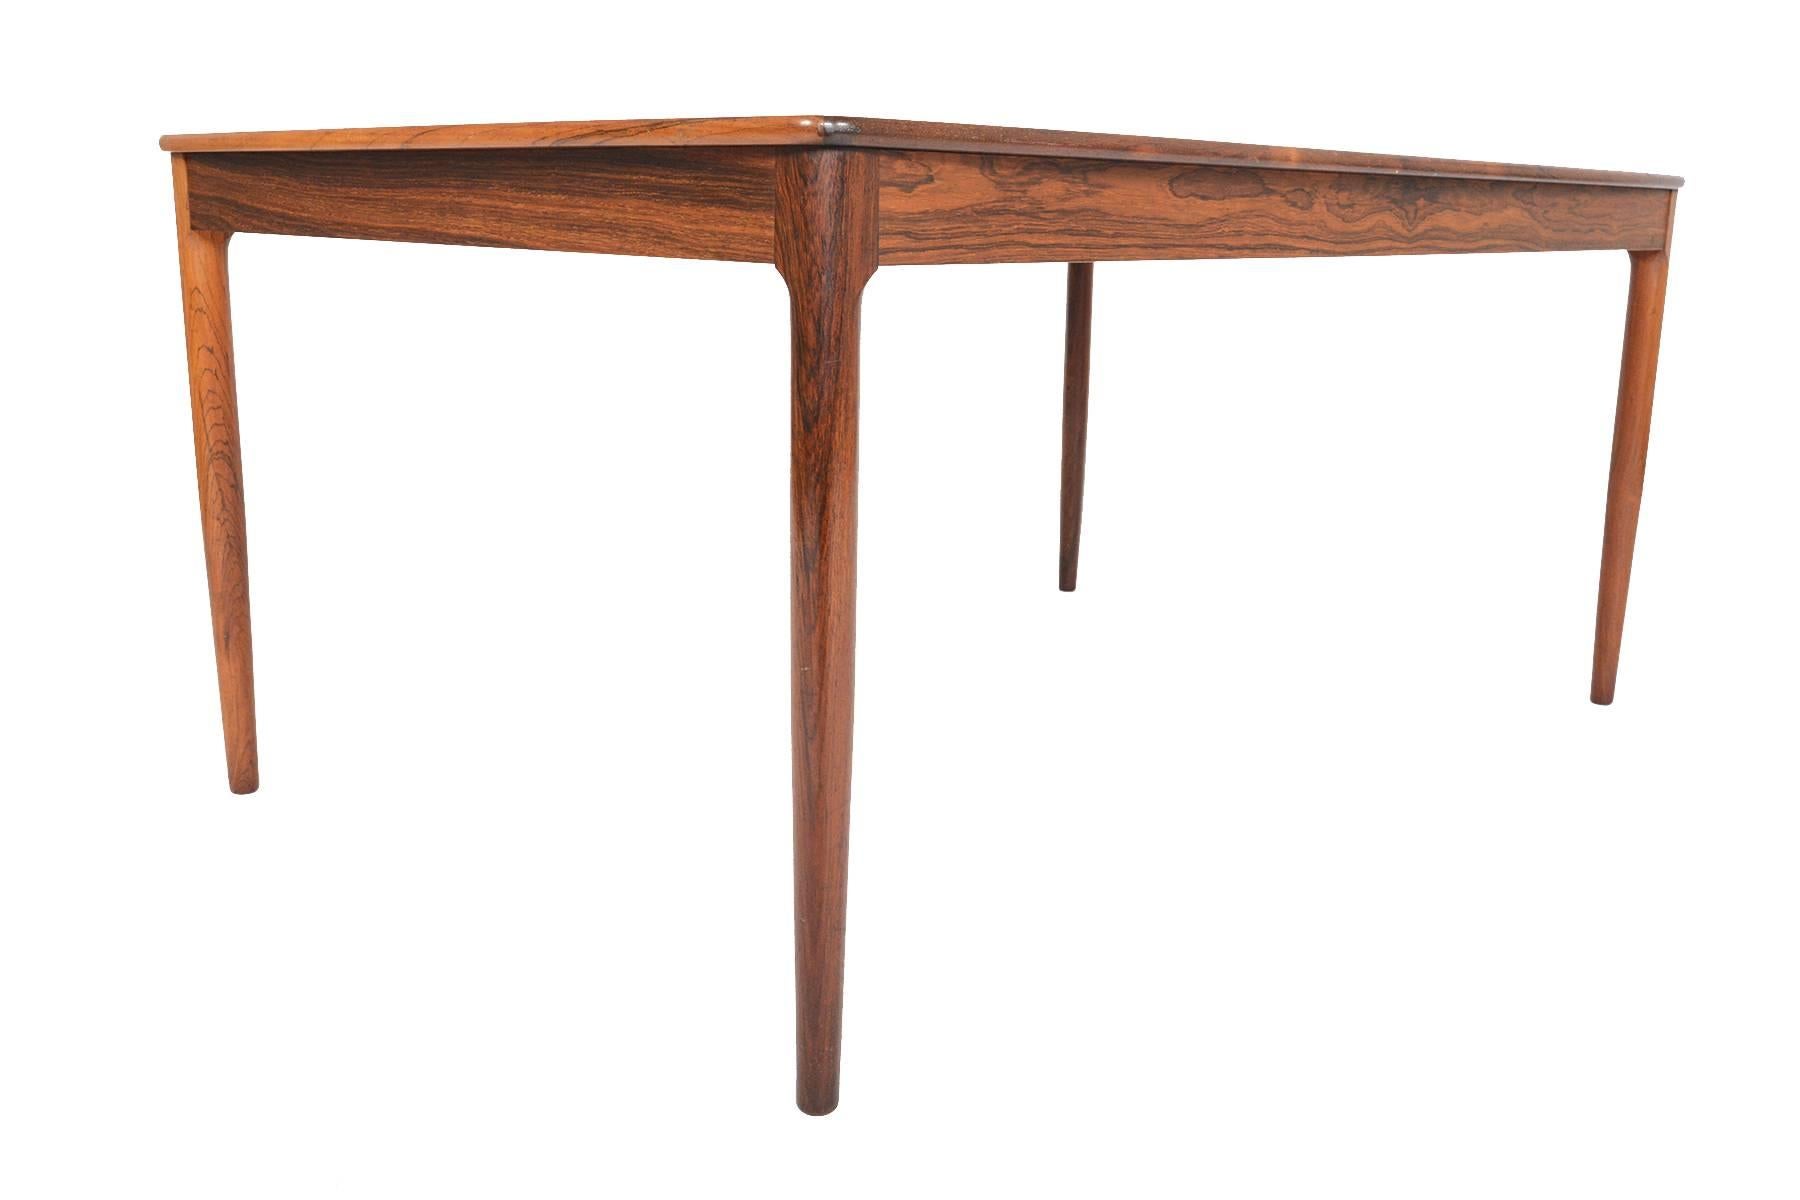 This magnificently large Yngvar Sandström designed Brazilian rosewood coffee table will add beauty to any home. Produced by AB Seffle Möbelfabrik in the 1960s, this gorgeous piece features brilliantly deep woodgrain, and soft rounded edges raised